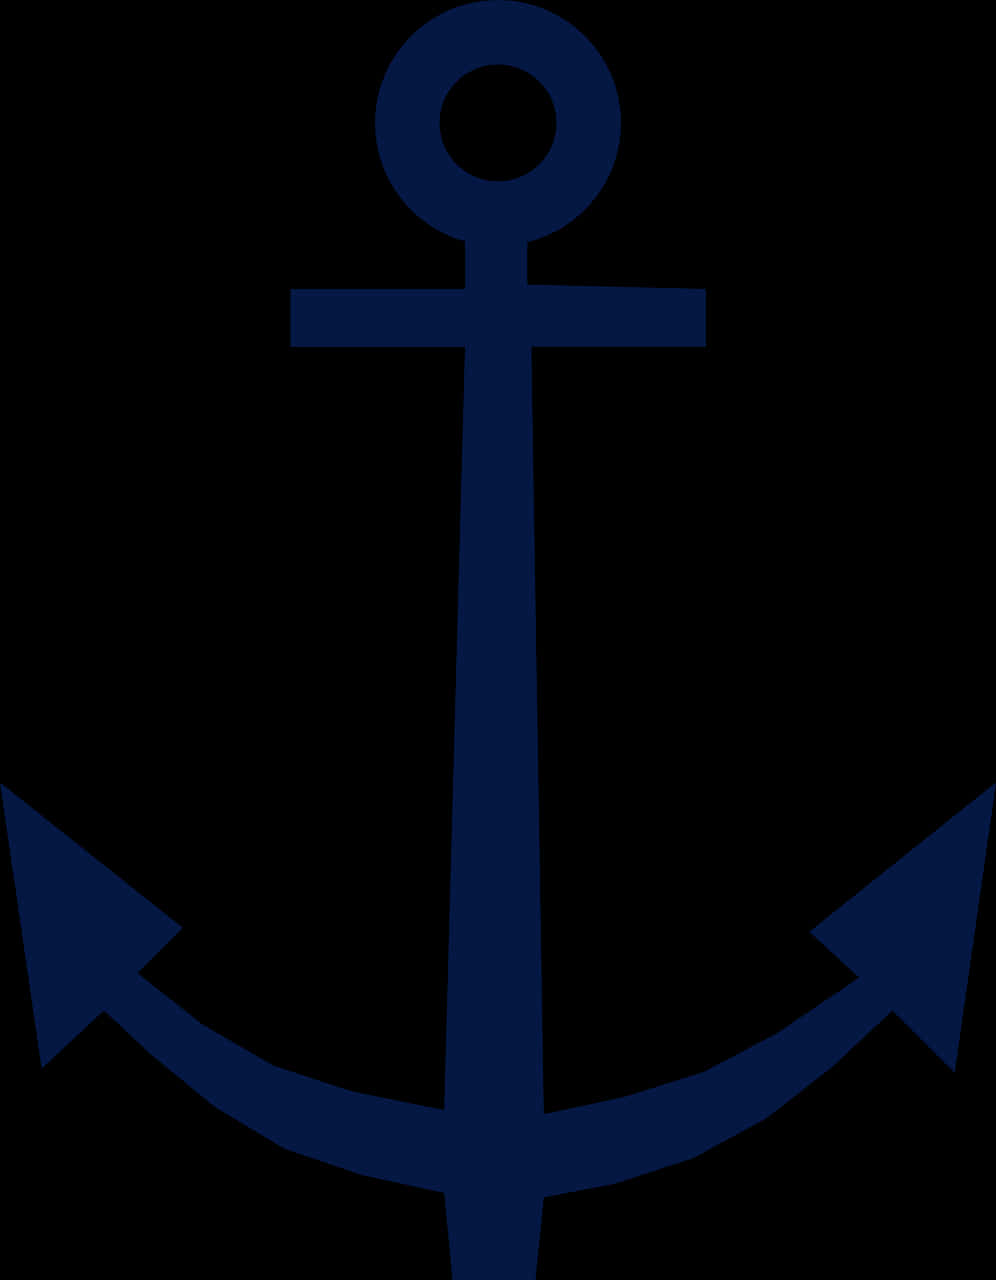 Navy Blue Anchor Graphic PNG image